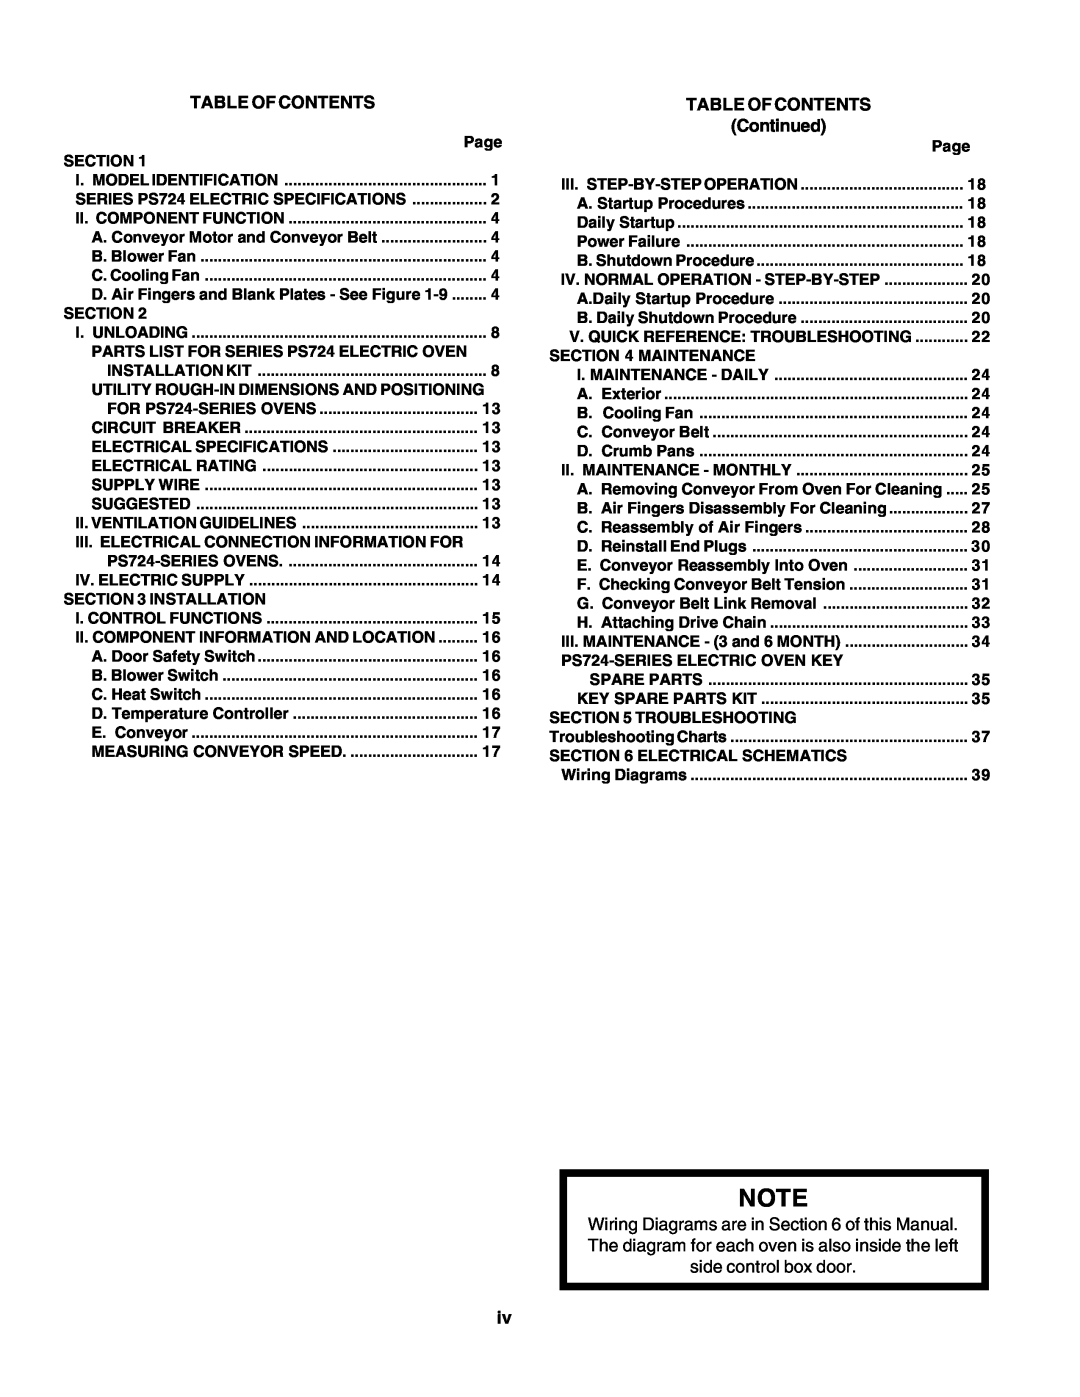 Middleby Marshall PS724E installation manual Table Of Contents, Continued 